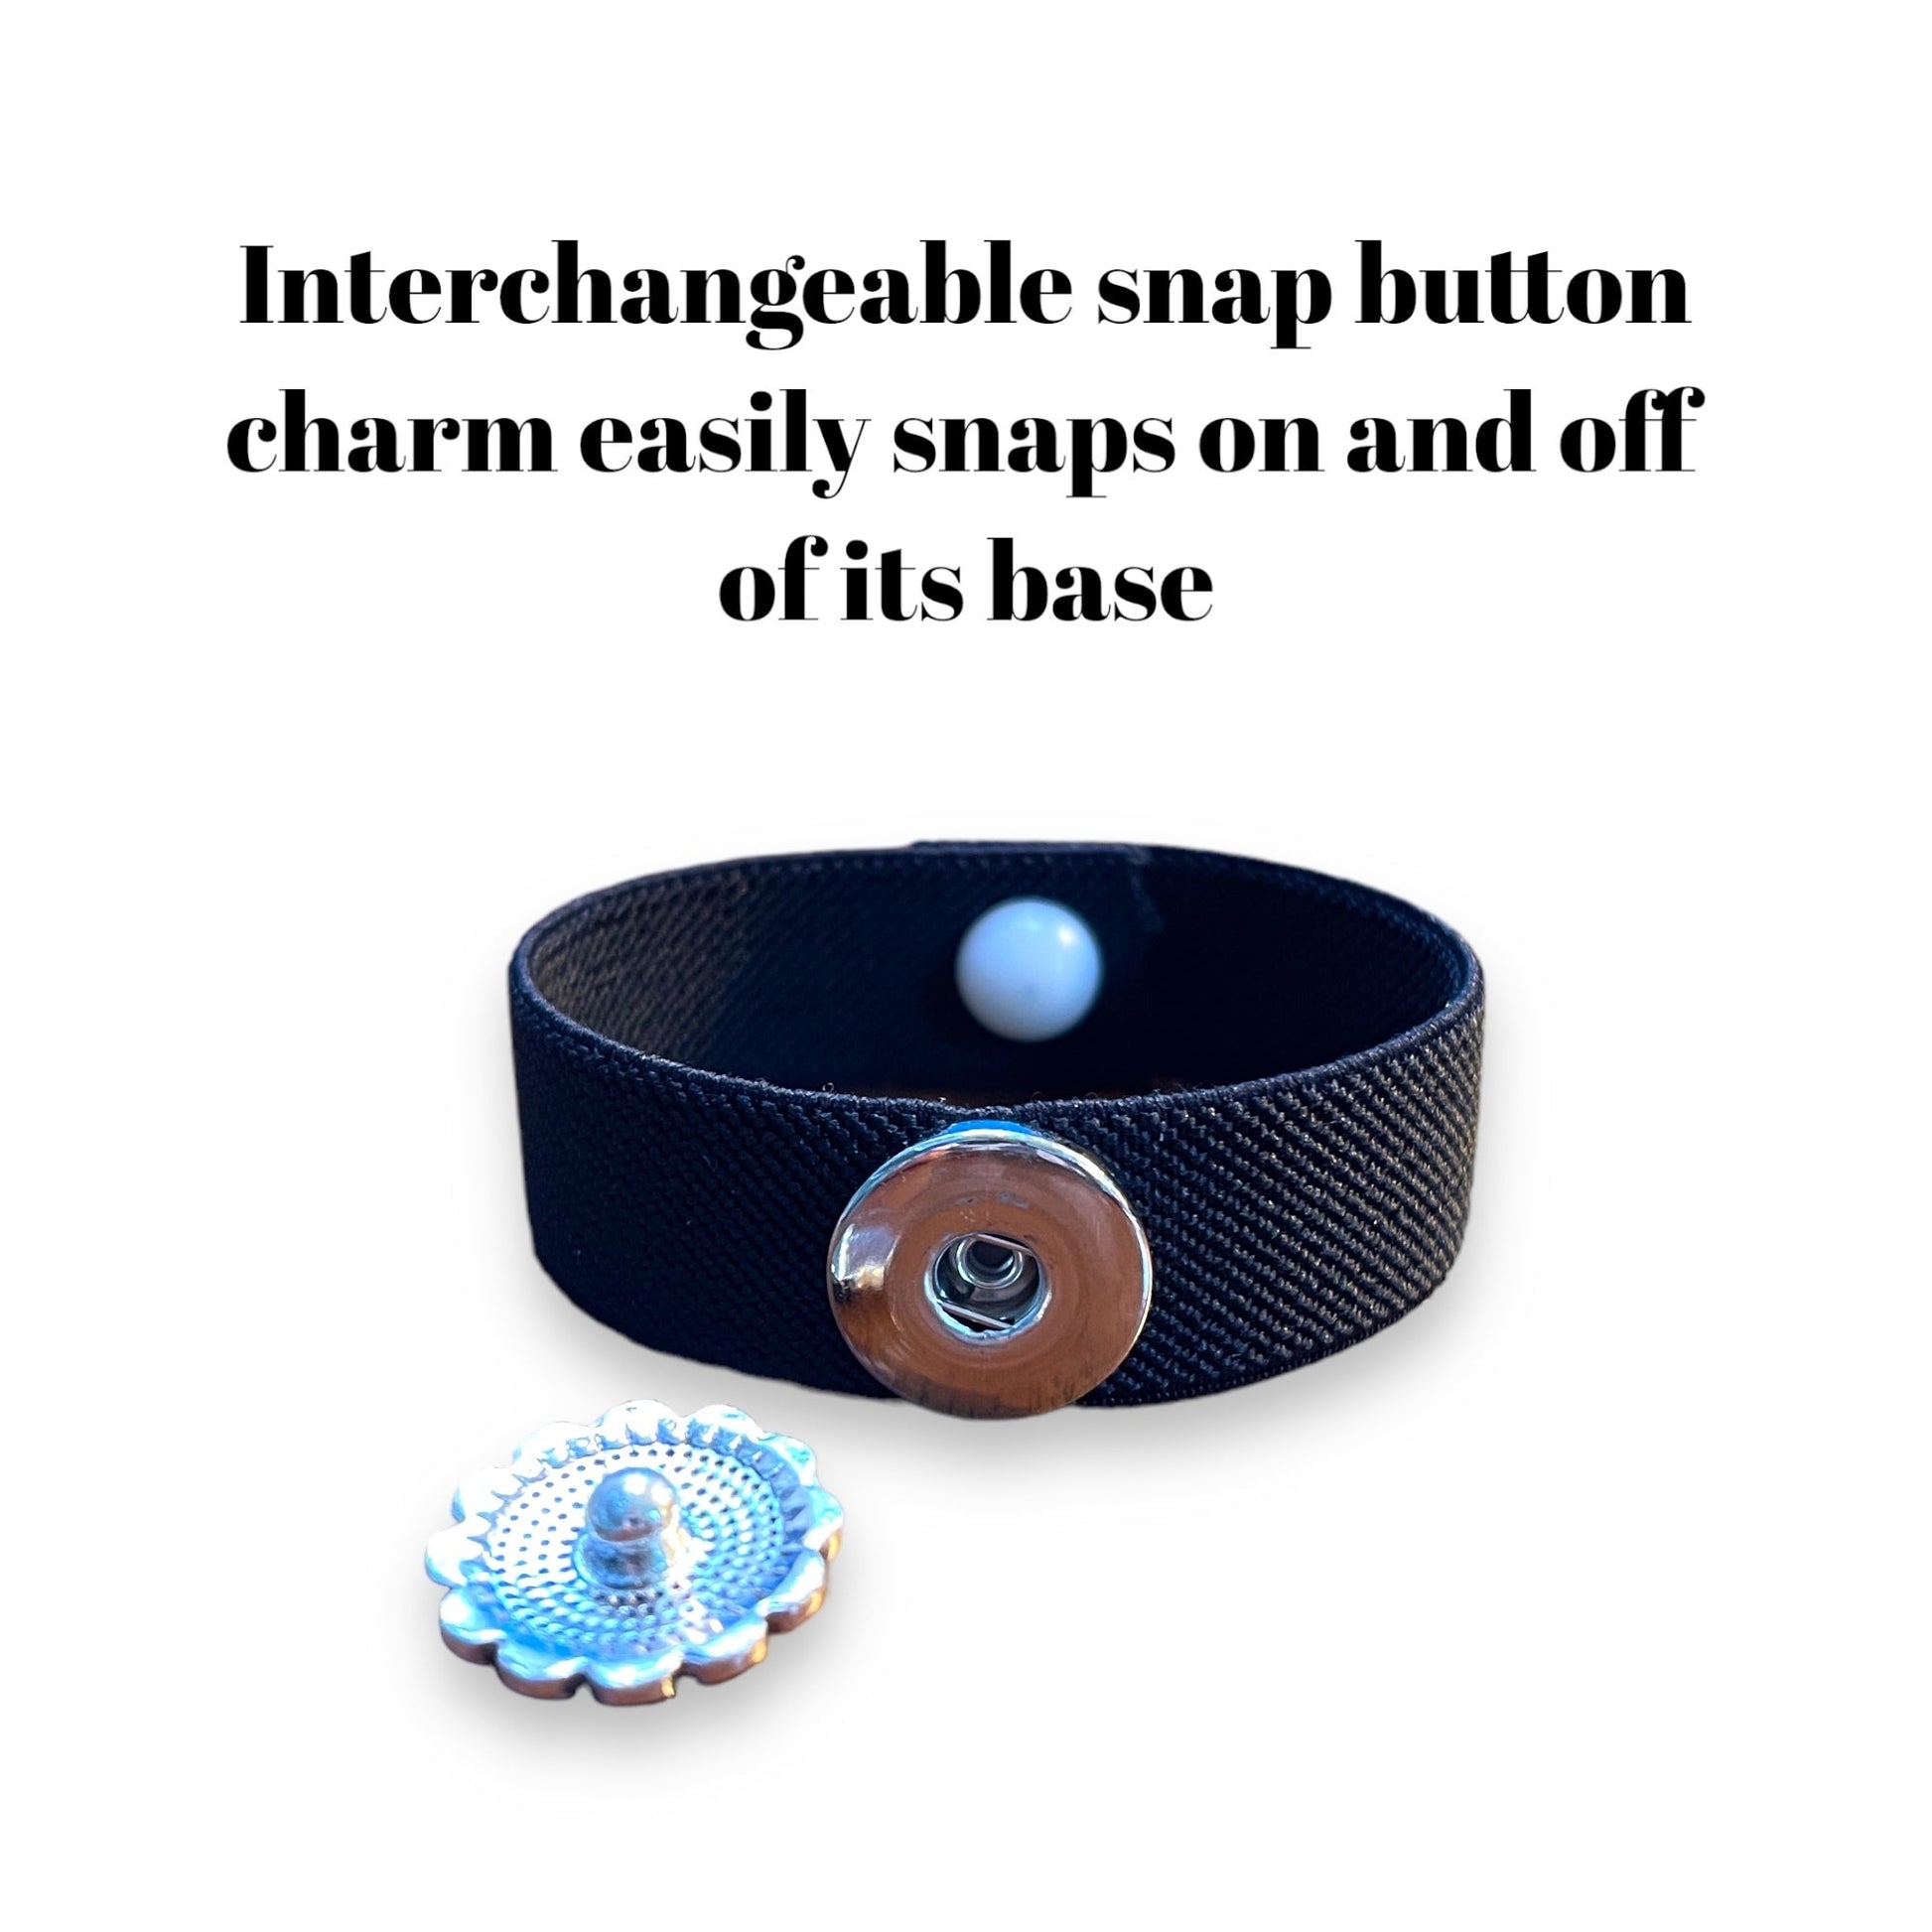 Snap Button Charm Anxiety Relief Calming Acupressure Bracelet-Natural Sleep Aid-Mood Support-Emotional Balance-Panic Attacks - Acupressure Bracelets